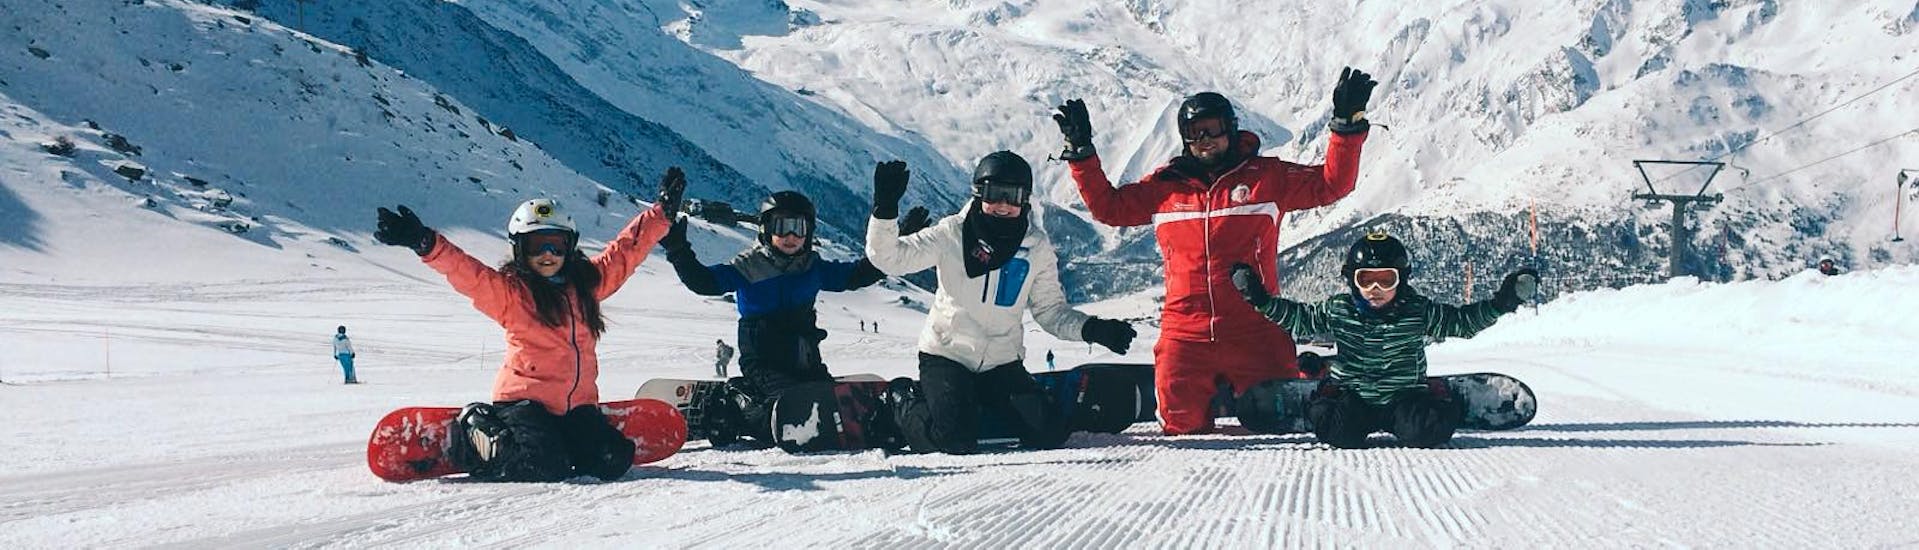 Four snowboarder and an instructor cheer at their Kids Snowboarding Lessons (6-12 y.) for Beginners from Swiss Ski School Saas-Grund.